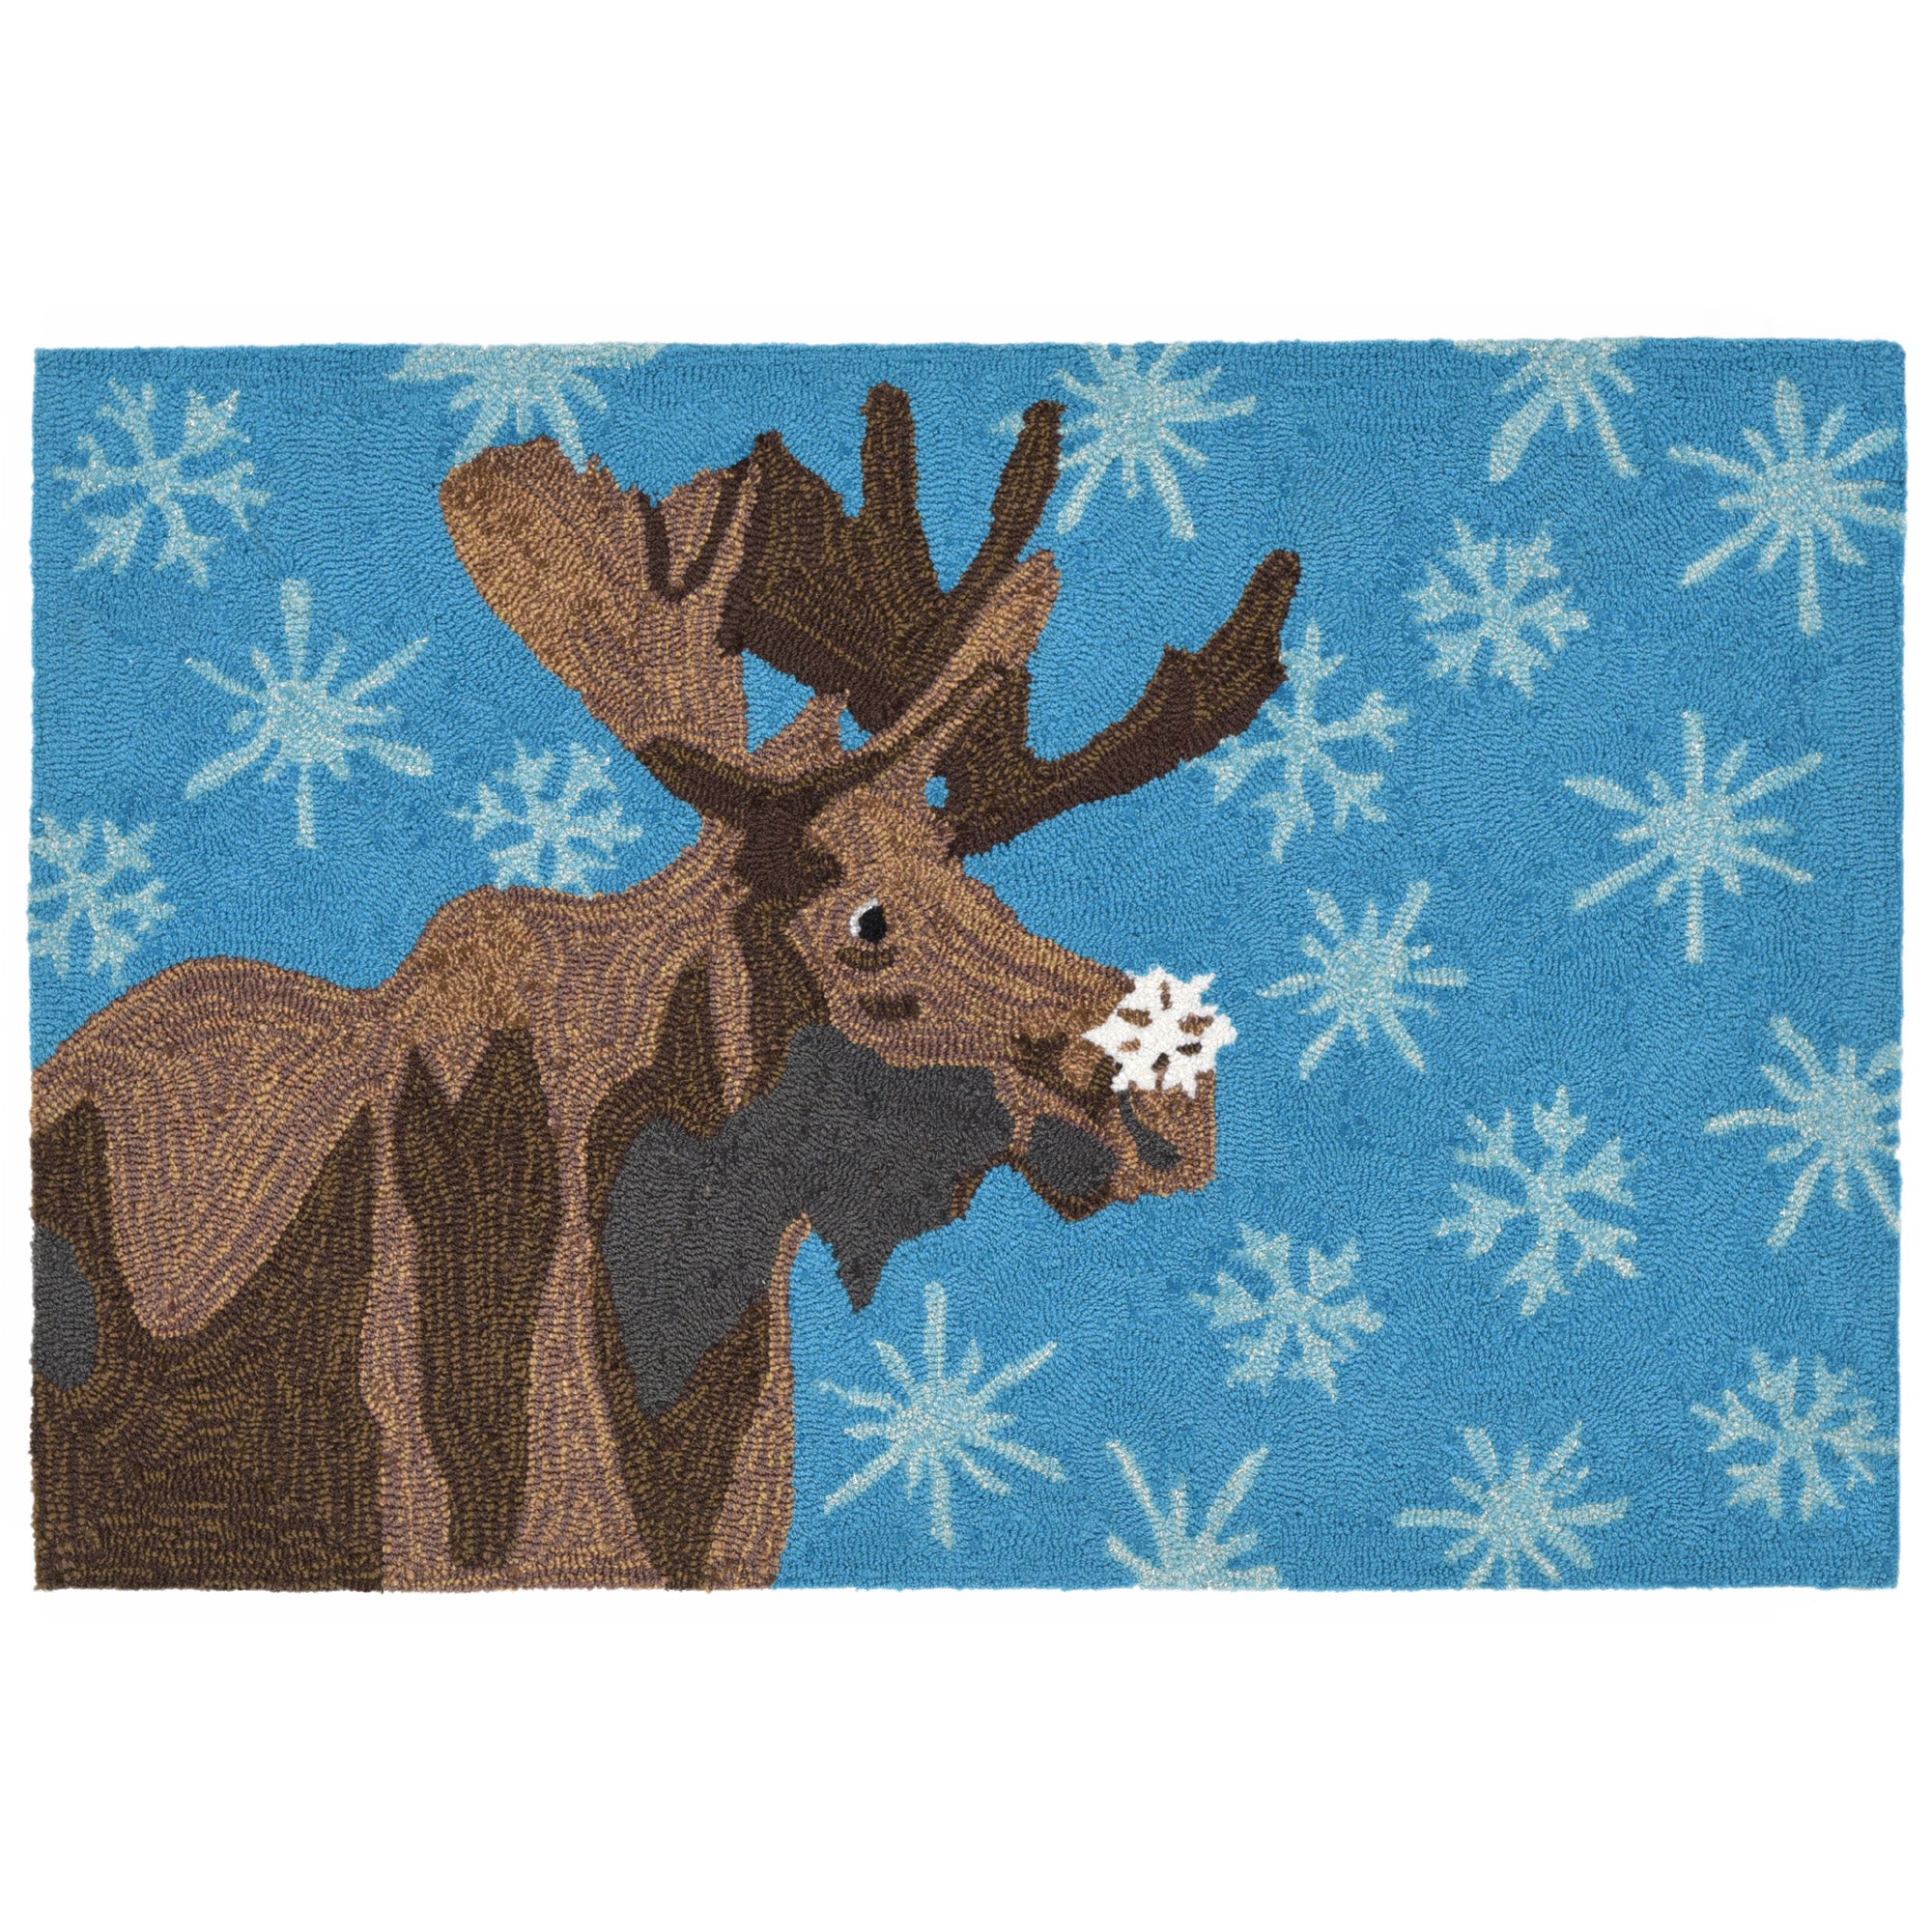 Trans-ocean Imports Ftp12186003 Liora Manne Frontporch Moose & Snowflake Indoor/outdoor Rug Blue 20"x30"